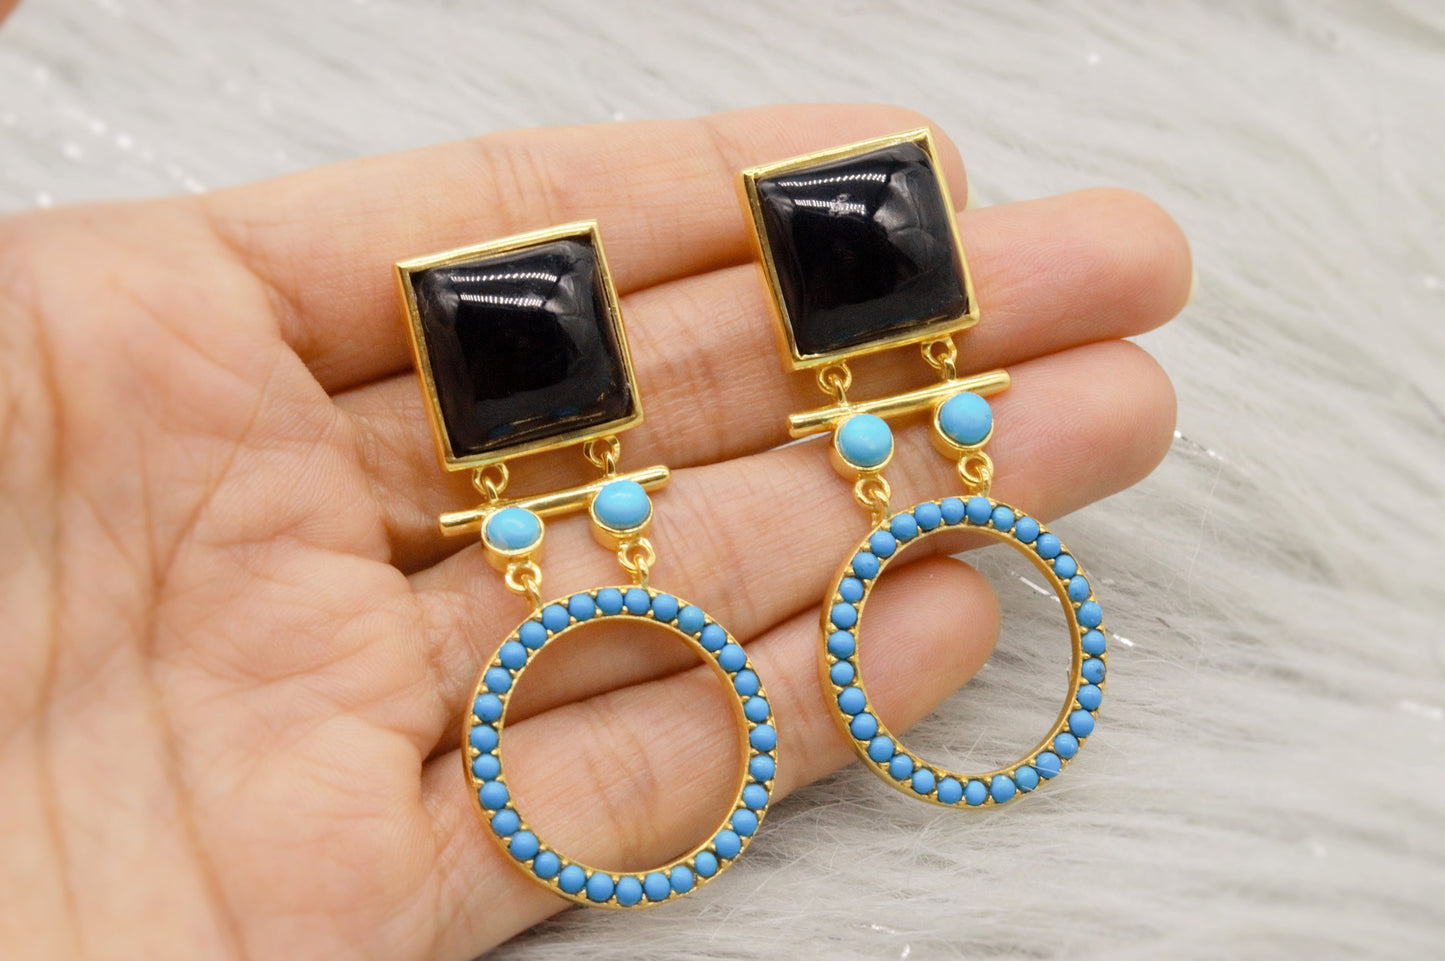 Black Onyx, Turquoise Gold Drop Earrings, December Birthstone Jewelry, Unique Dangle Jhumka Earrings, Birthday Gifts For Her